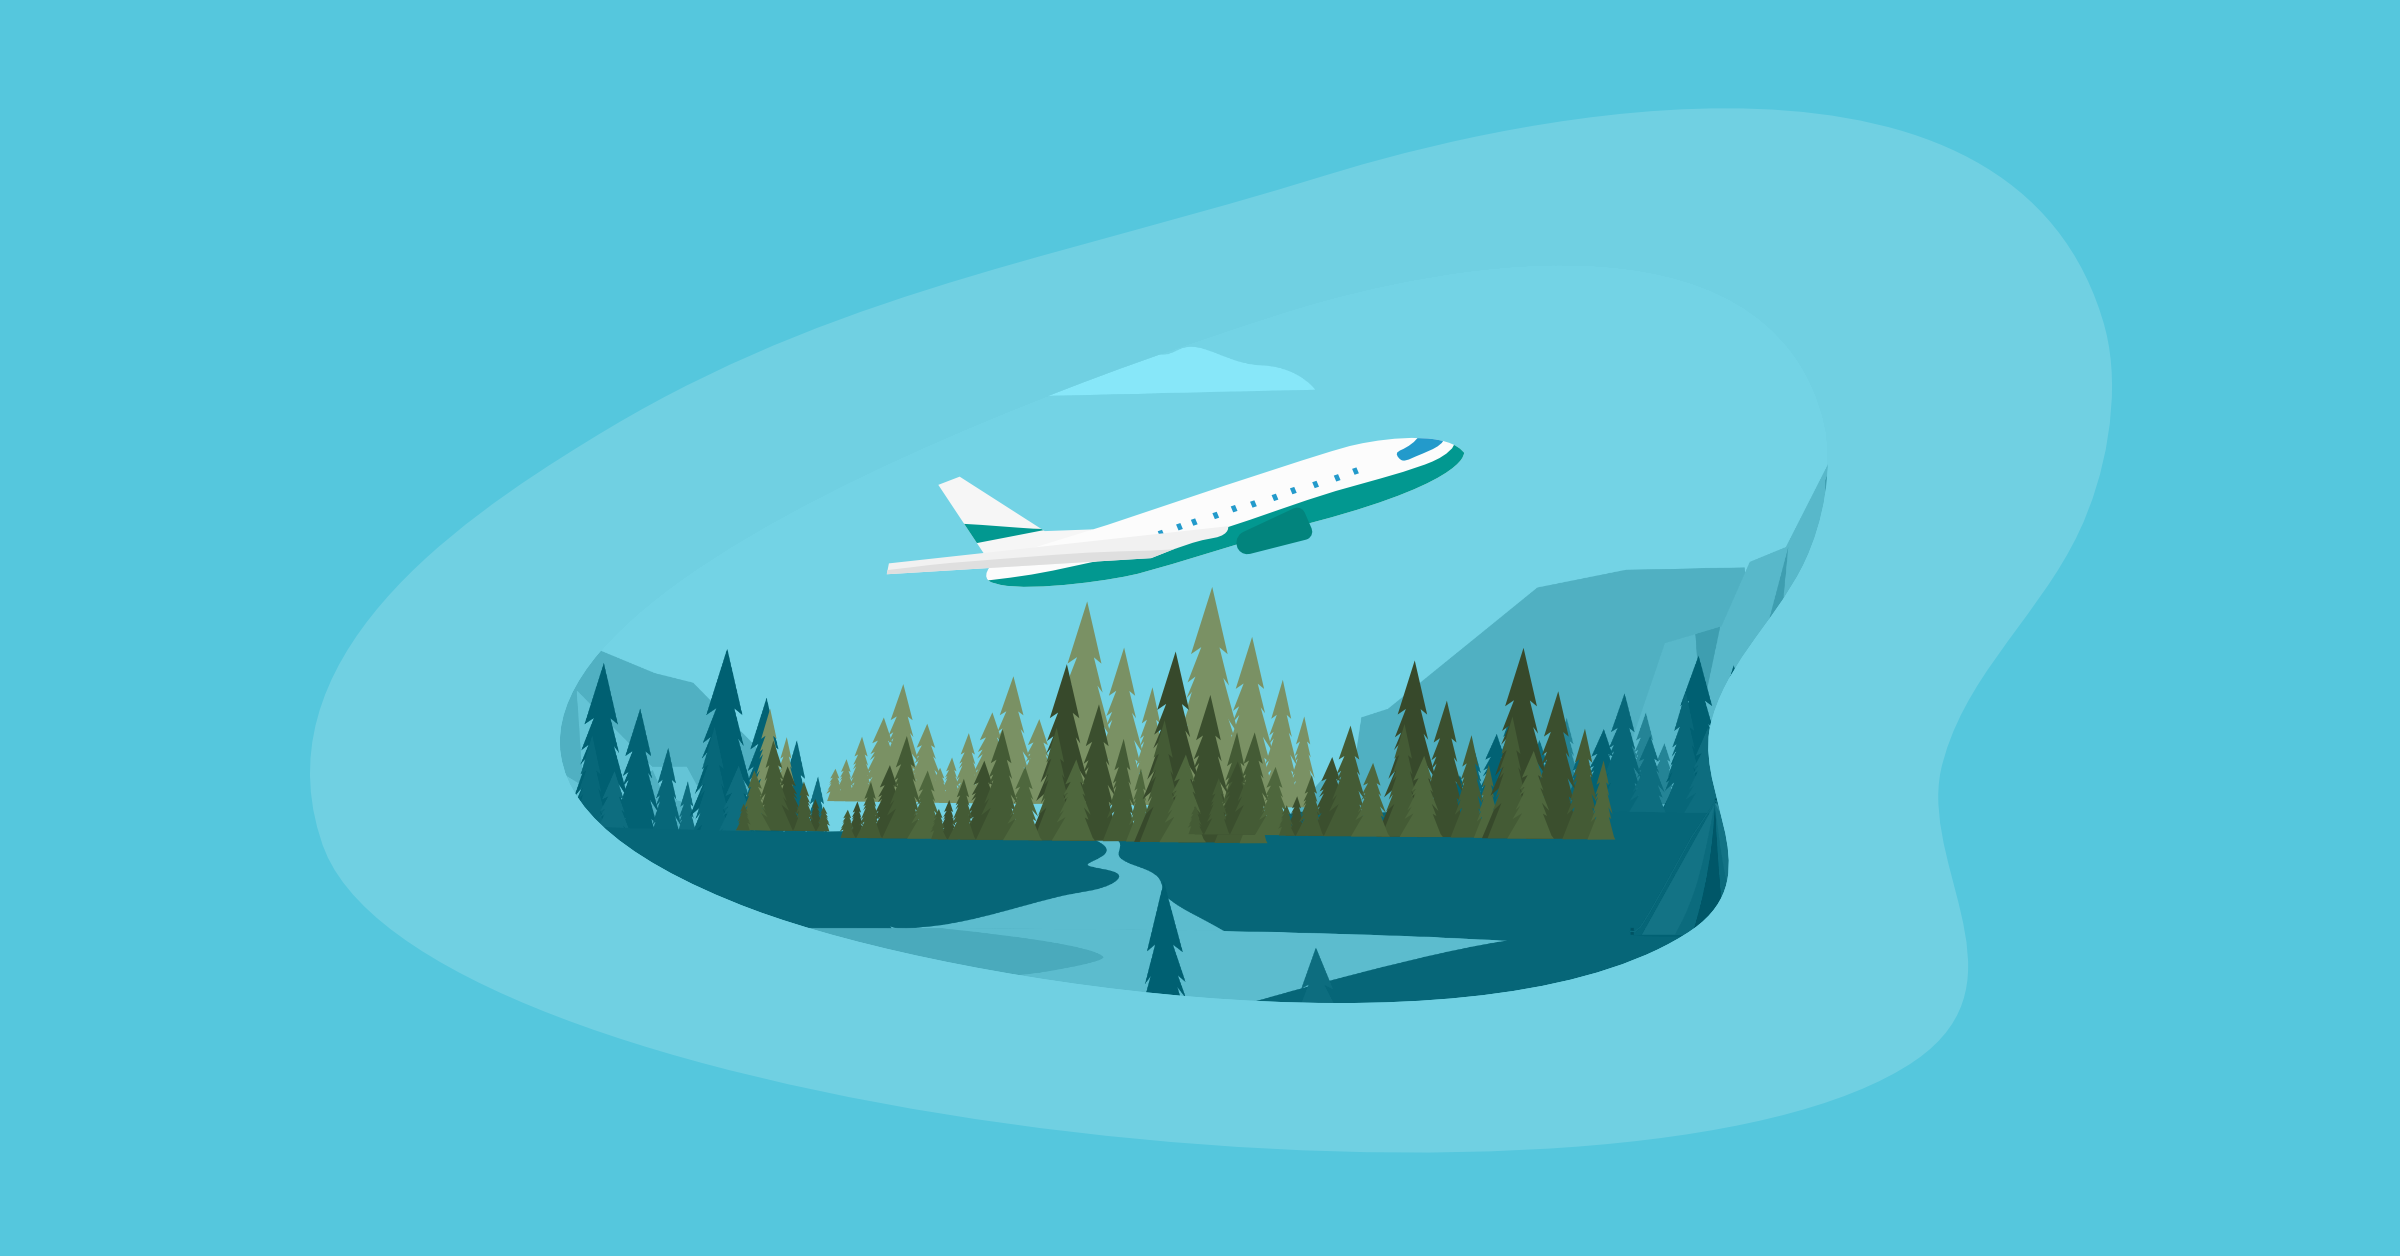 Illustration of an airplane above a forest